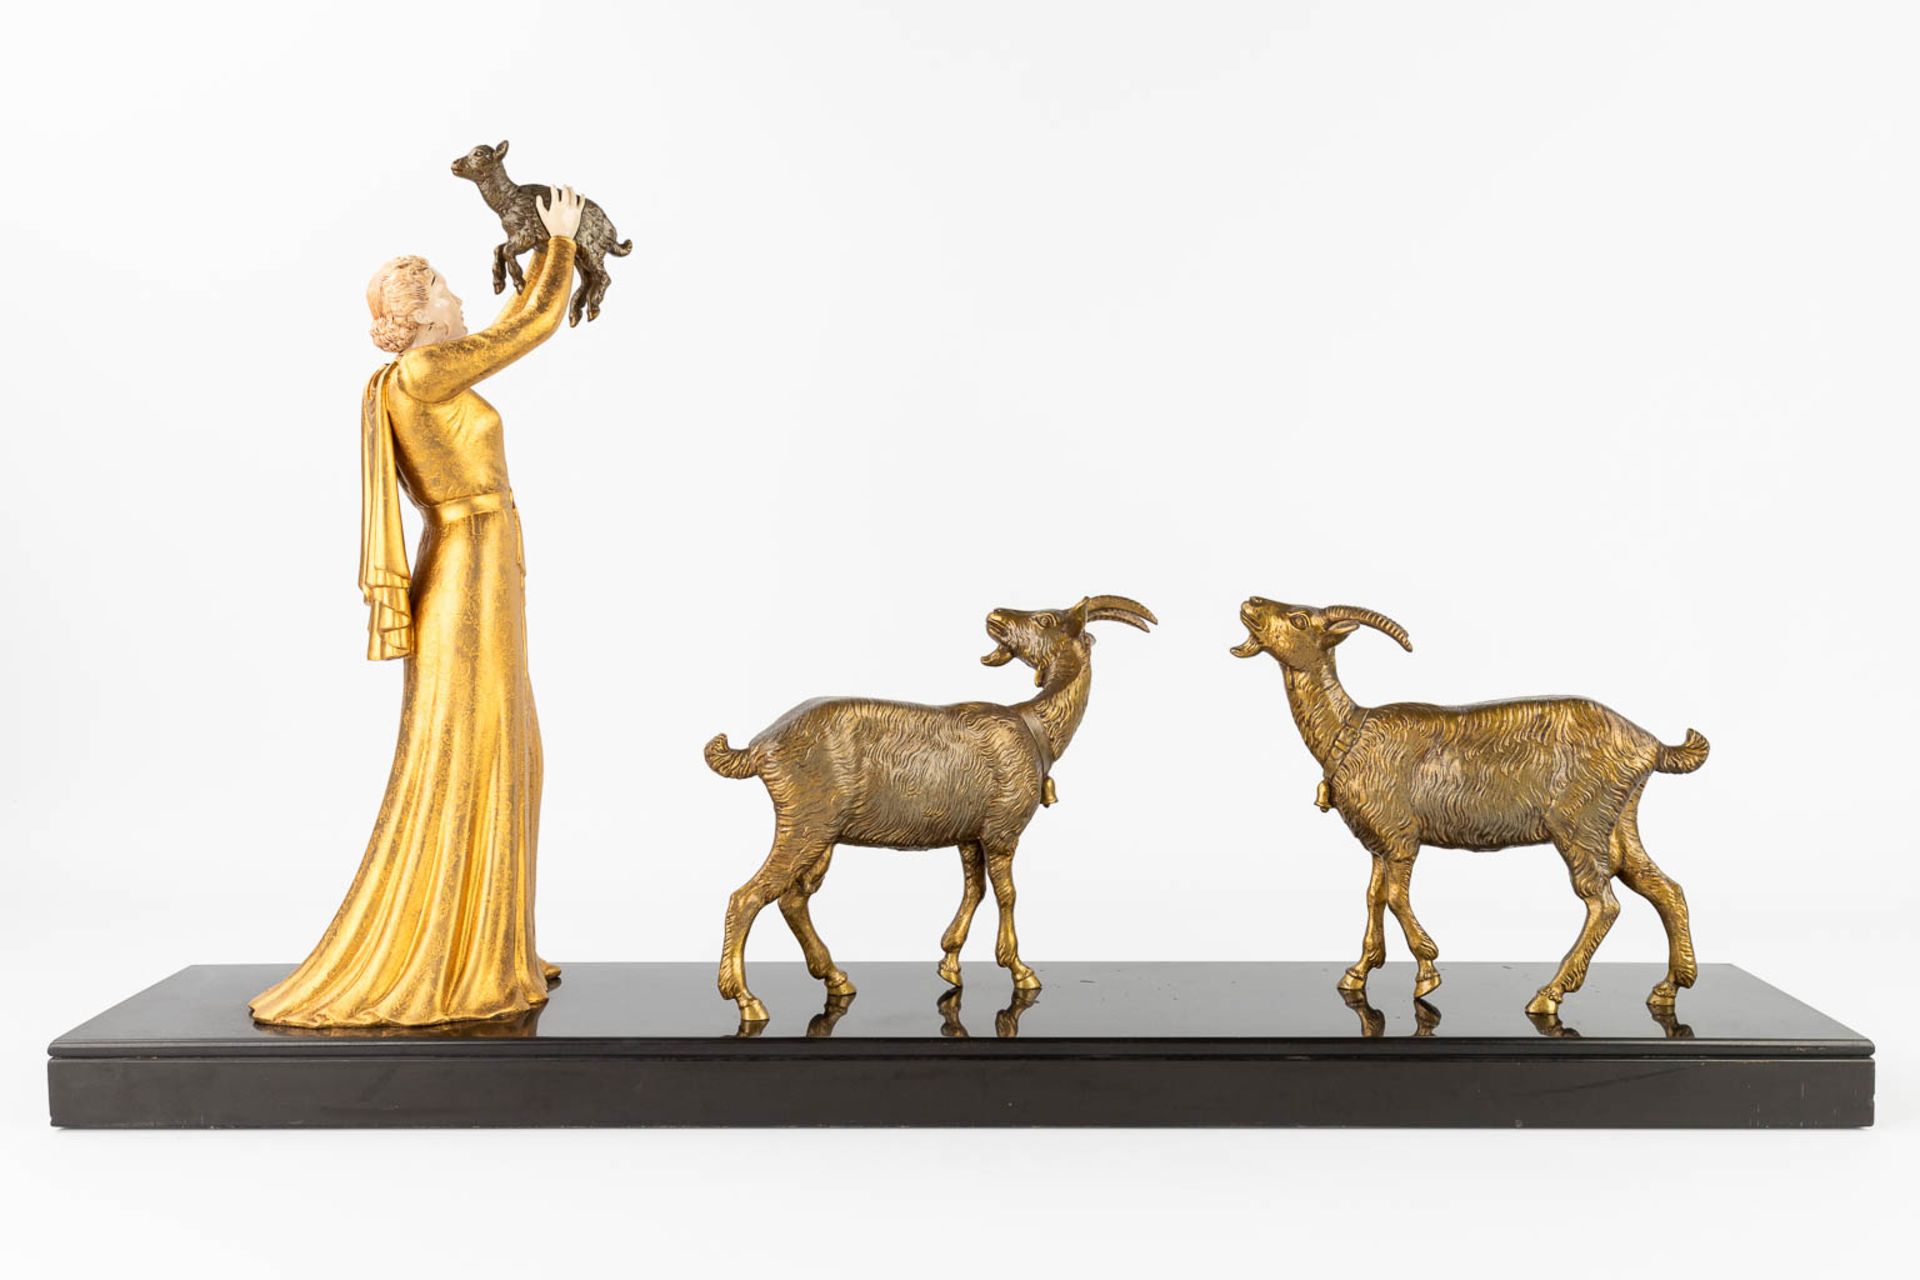 Lady with 3 goats, a statue made in art deco style (L:16,5 x W:85 x H:48,5 cm) - Bild 6 aus 13